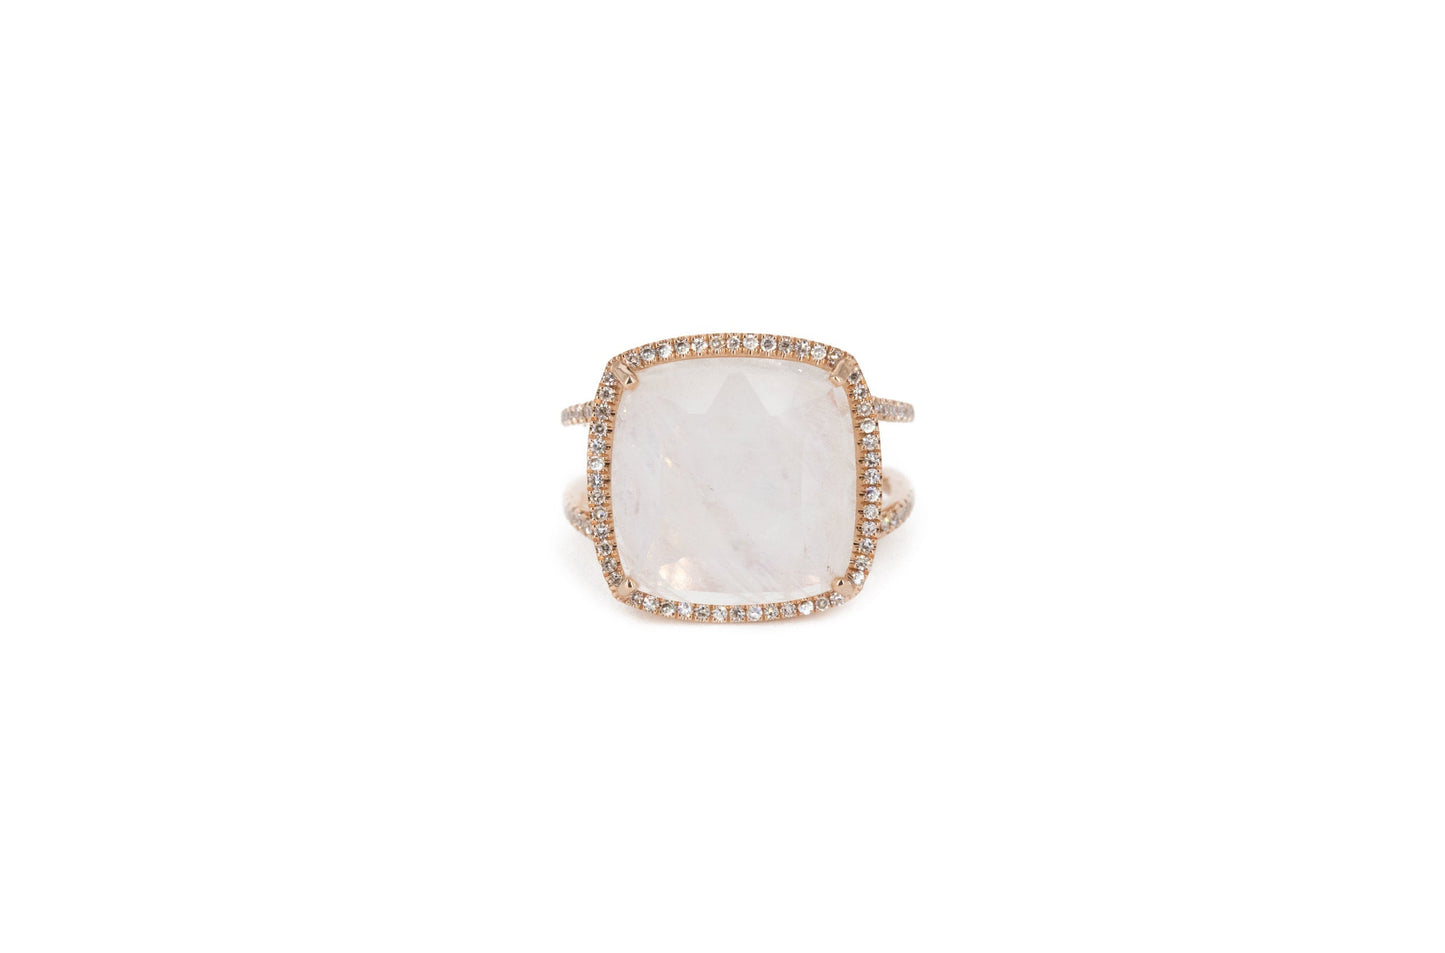 14KT Rose Gold Diamond Pave and Moonstone Ring